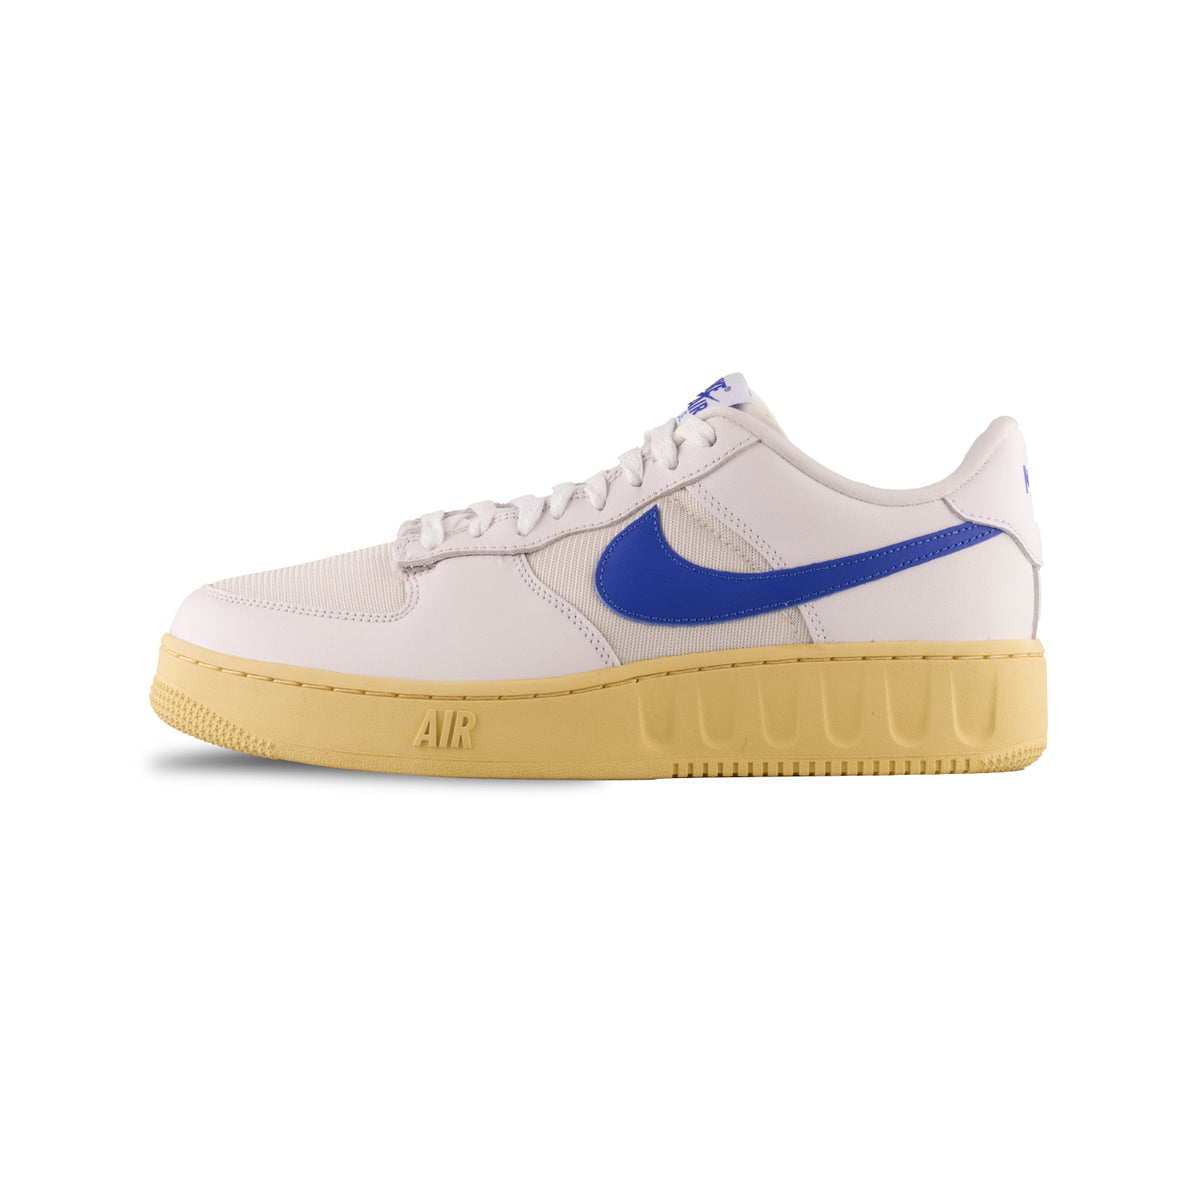 Nike Air Force 1 Low Utility White Racer Blue DM2385-100